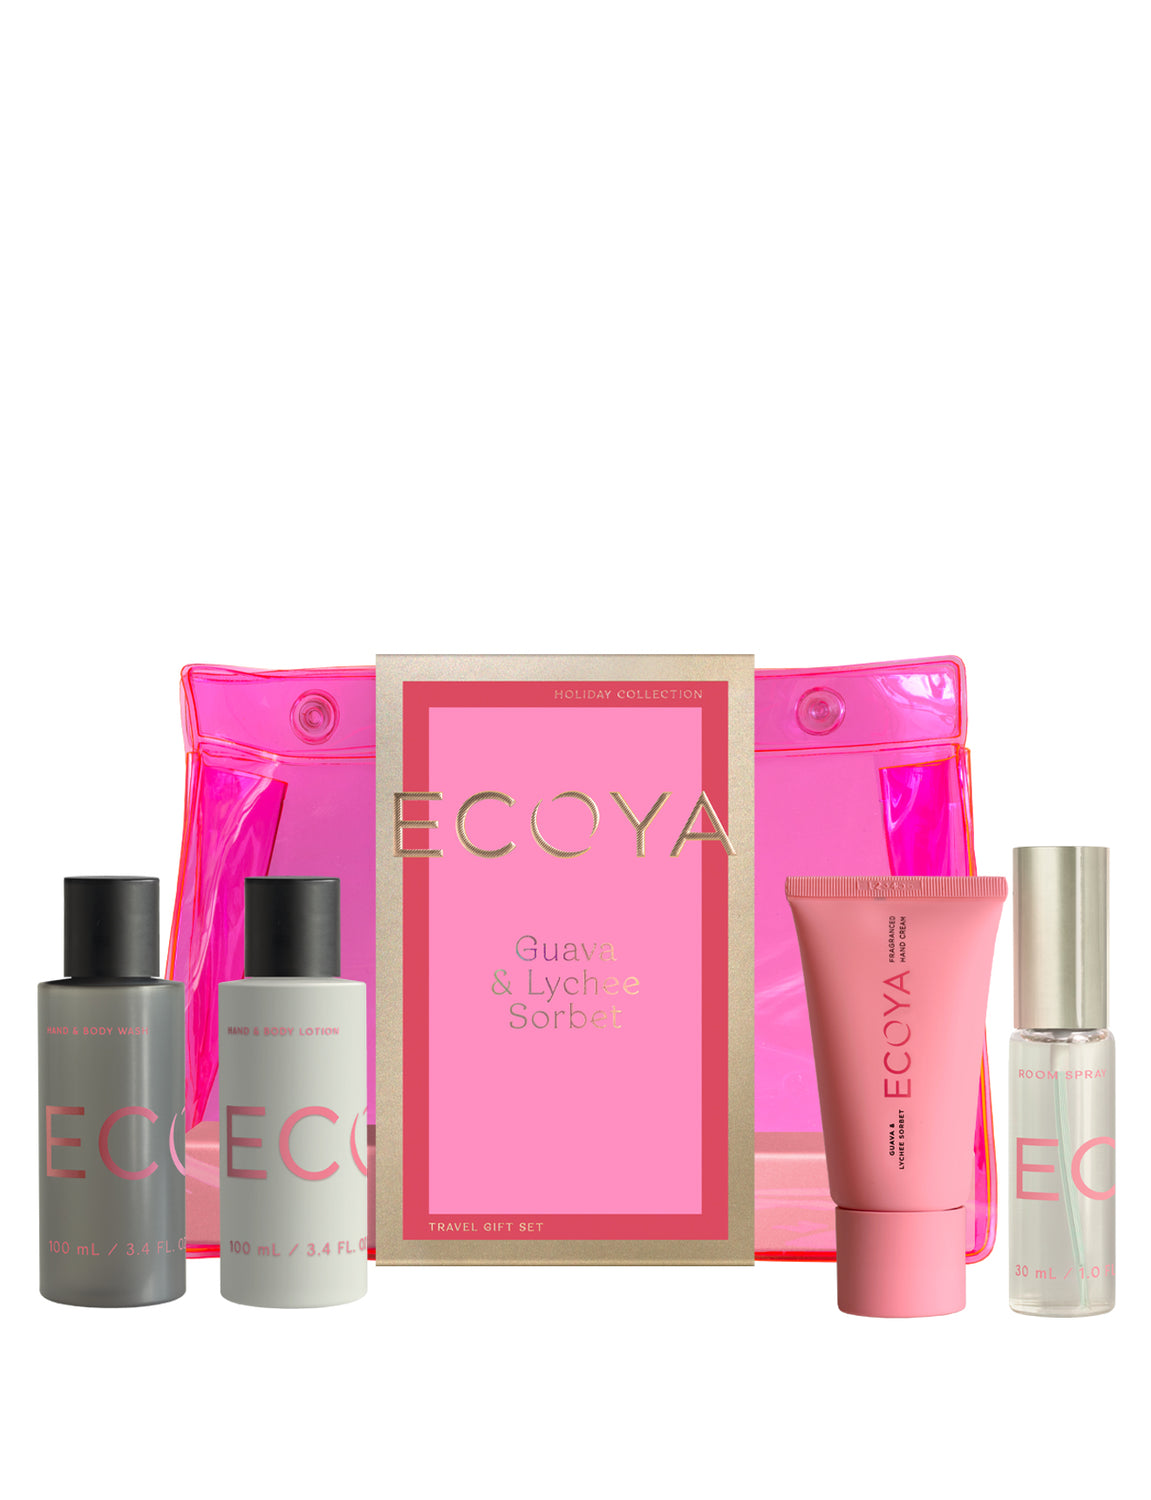 Guava & Lychee Sorbet Travel Gift Set Holiday Collection